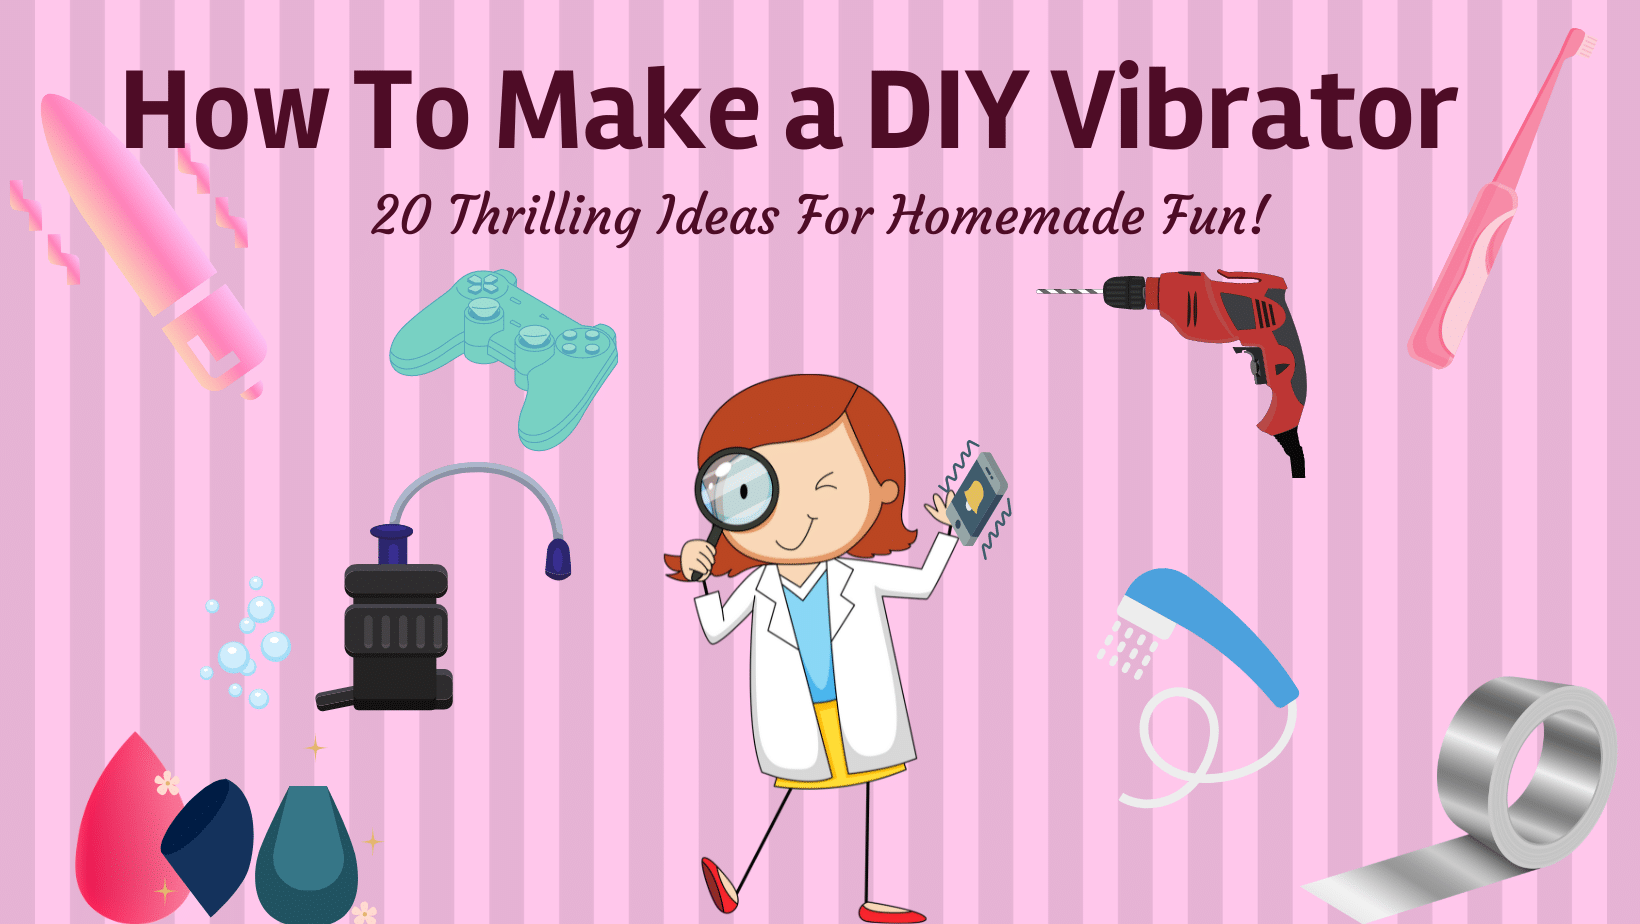 How to Make a DIY Vibrator: 20 Thrilling Ideas for Homemade Fun